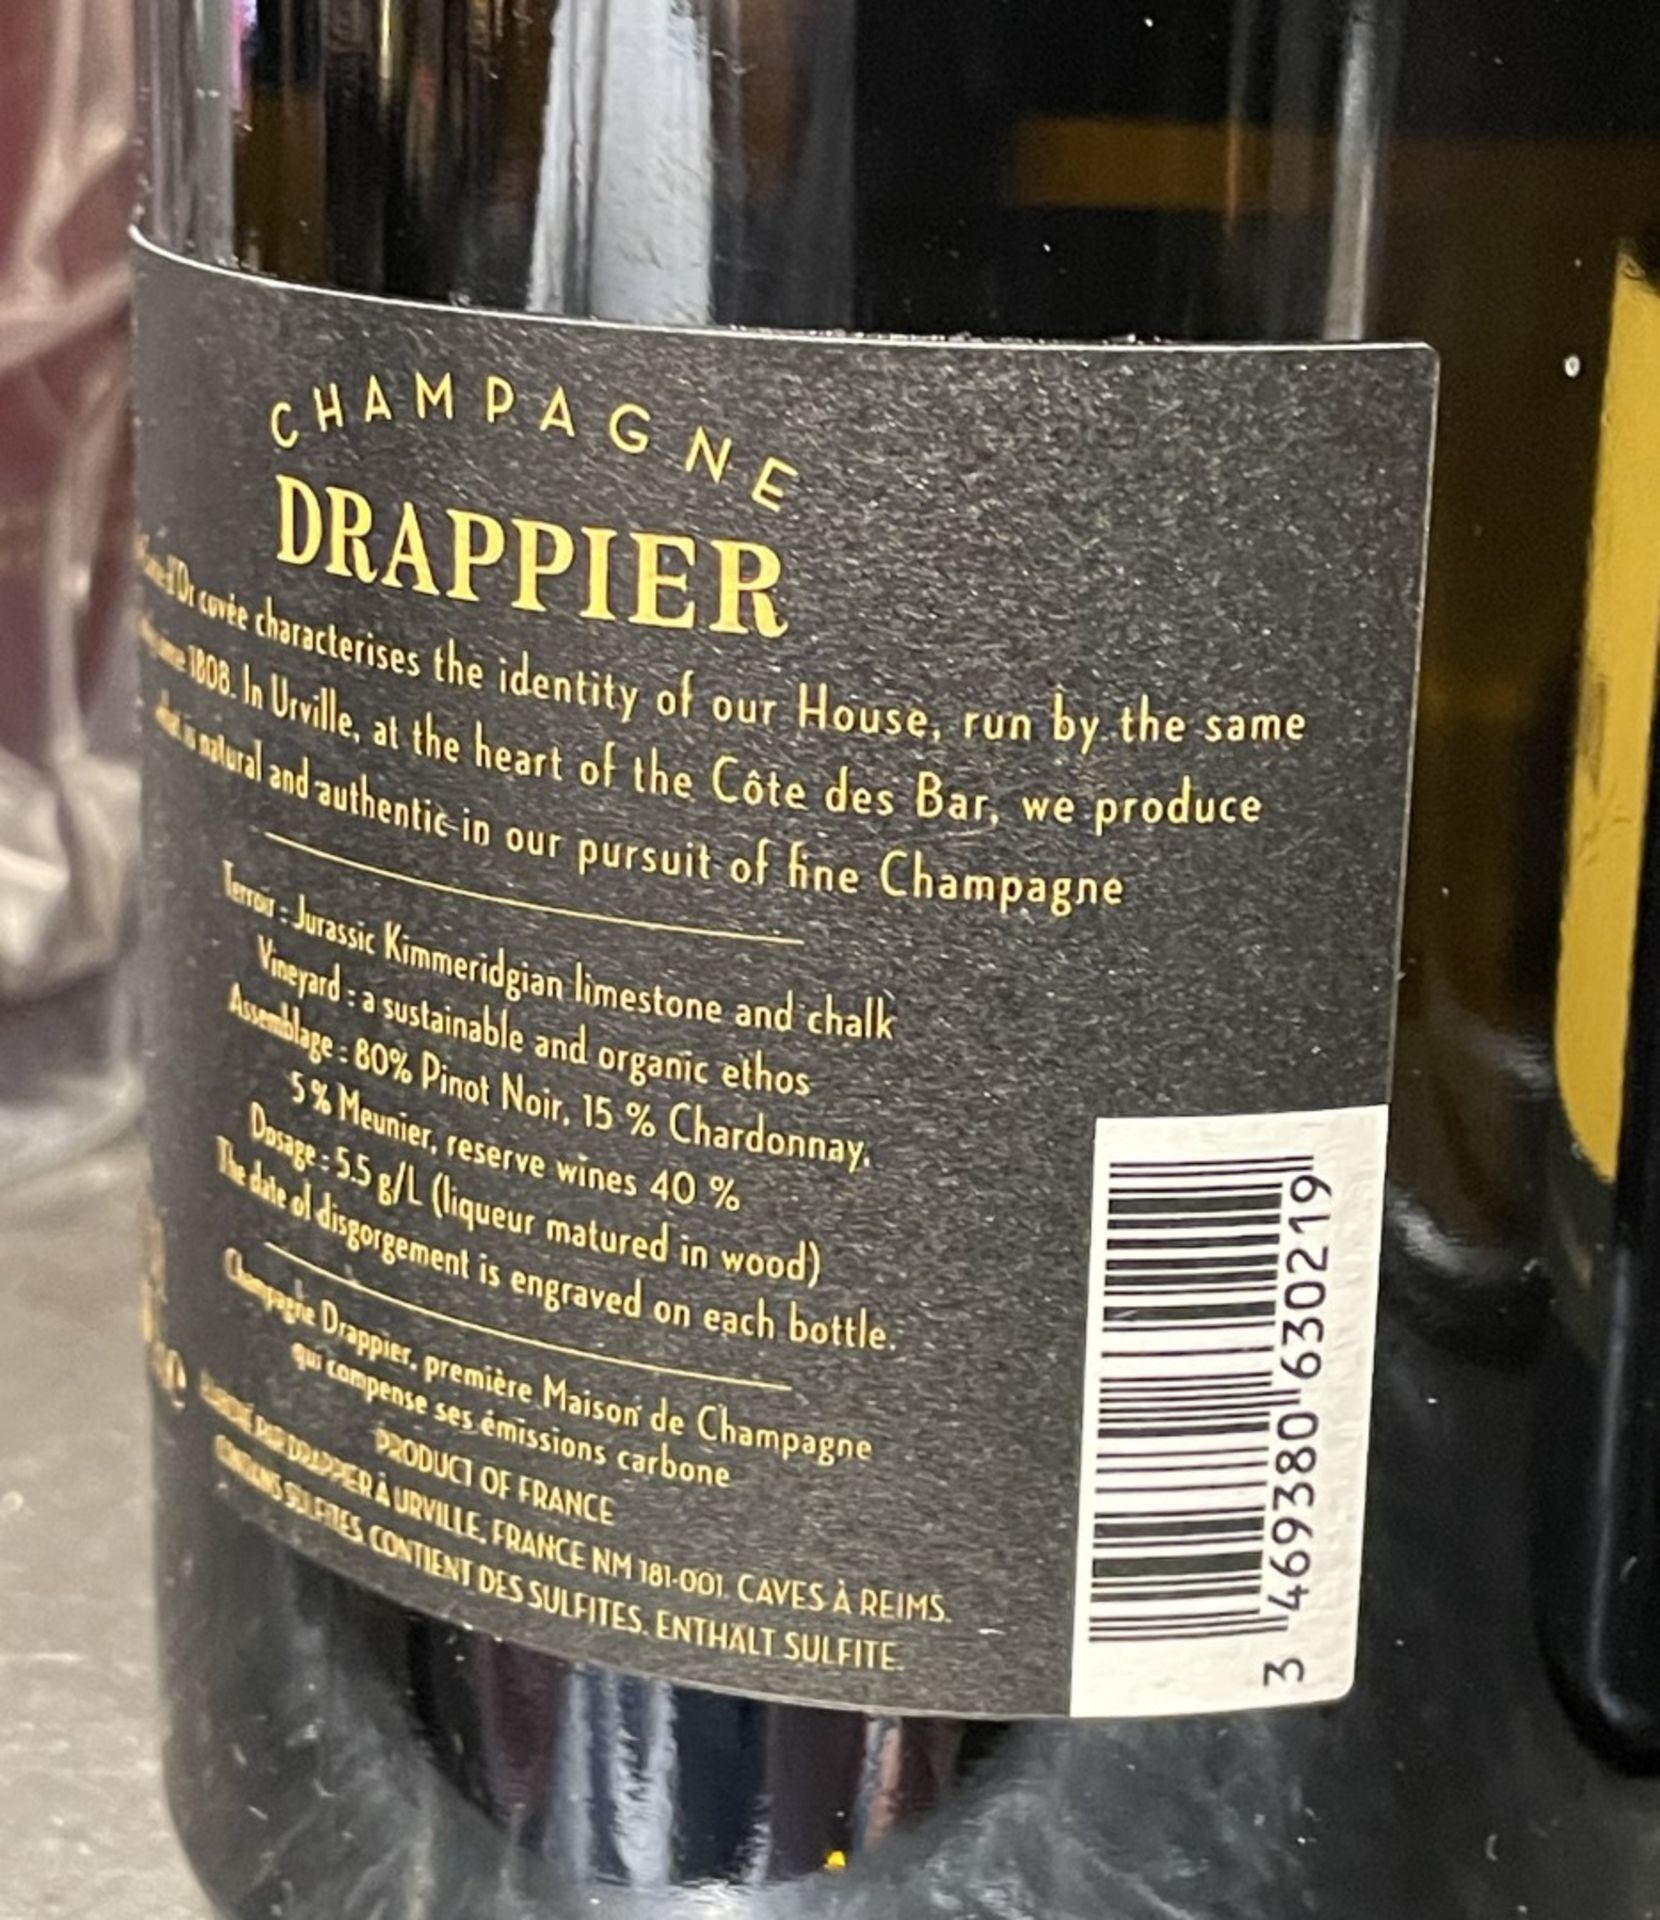 3 x Bottles of 750ml Drappier Champagne - New Unopened Bottles - Image 6 of 9